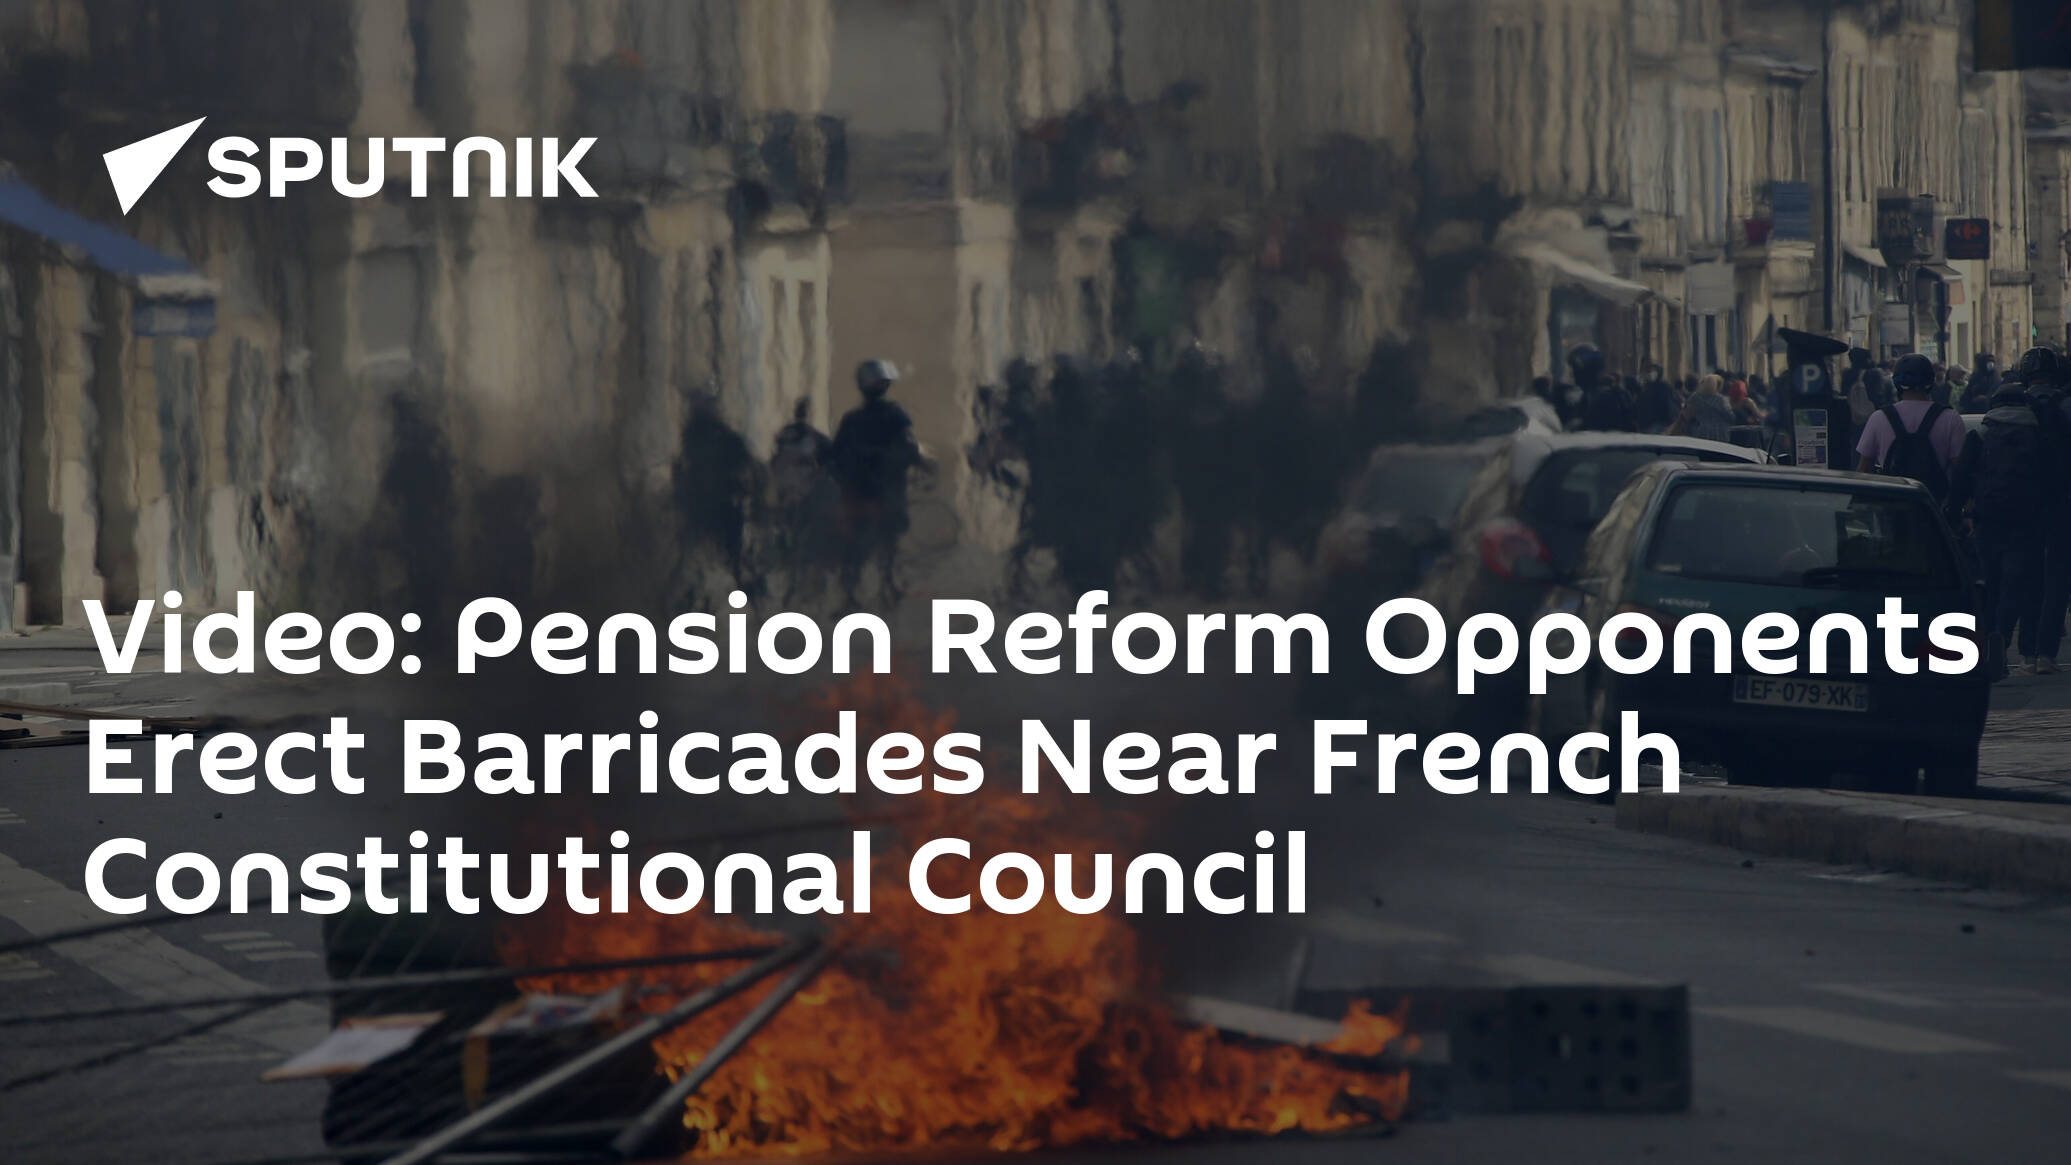 Video: Pension Reform Opponents Erect Barricades Near French Constitutional Council